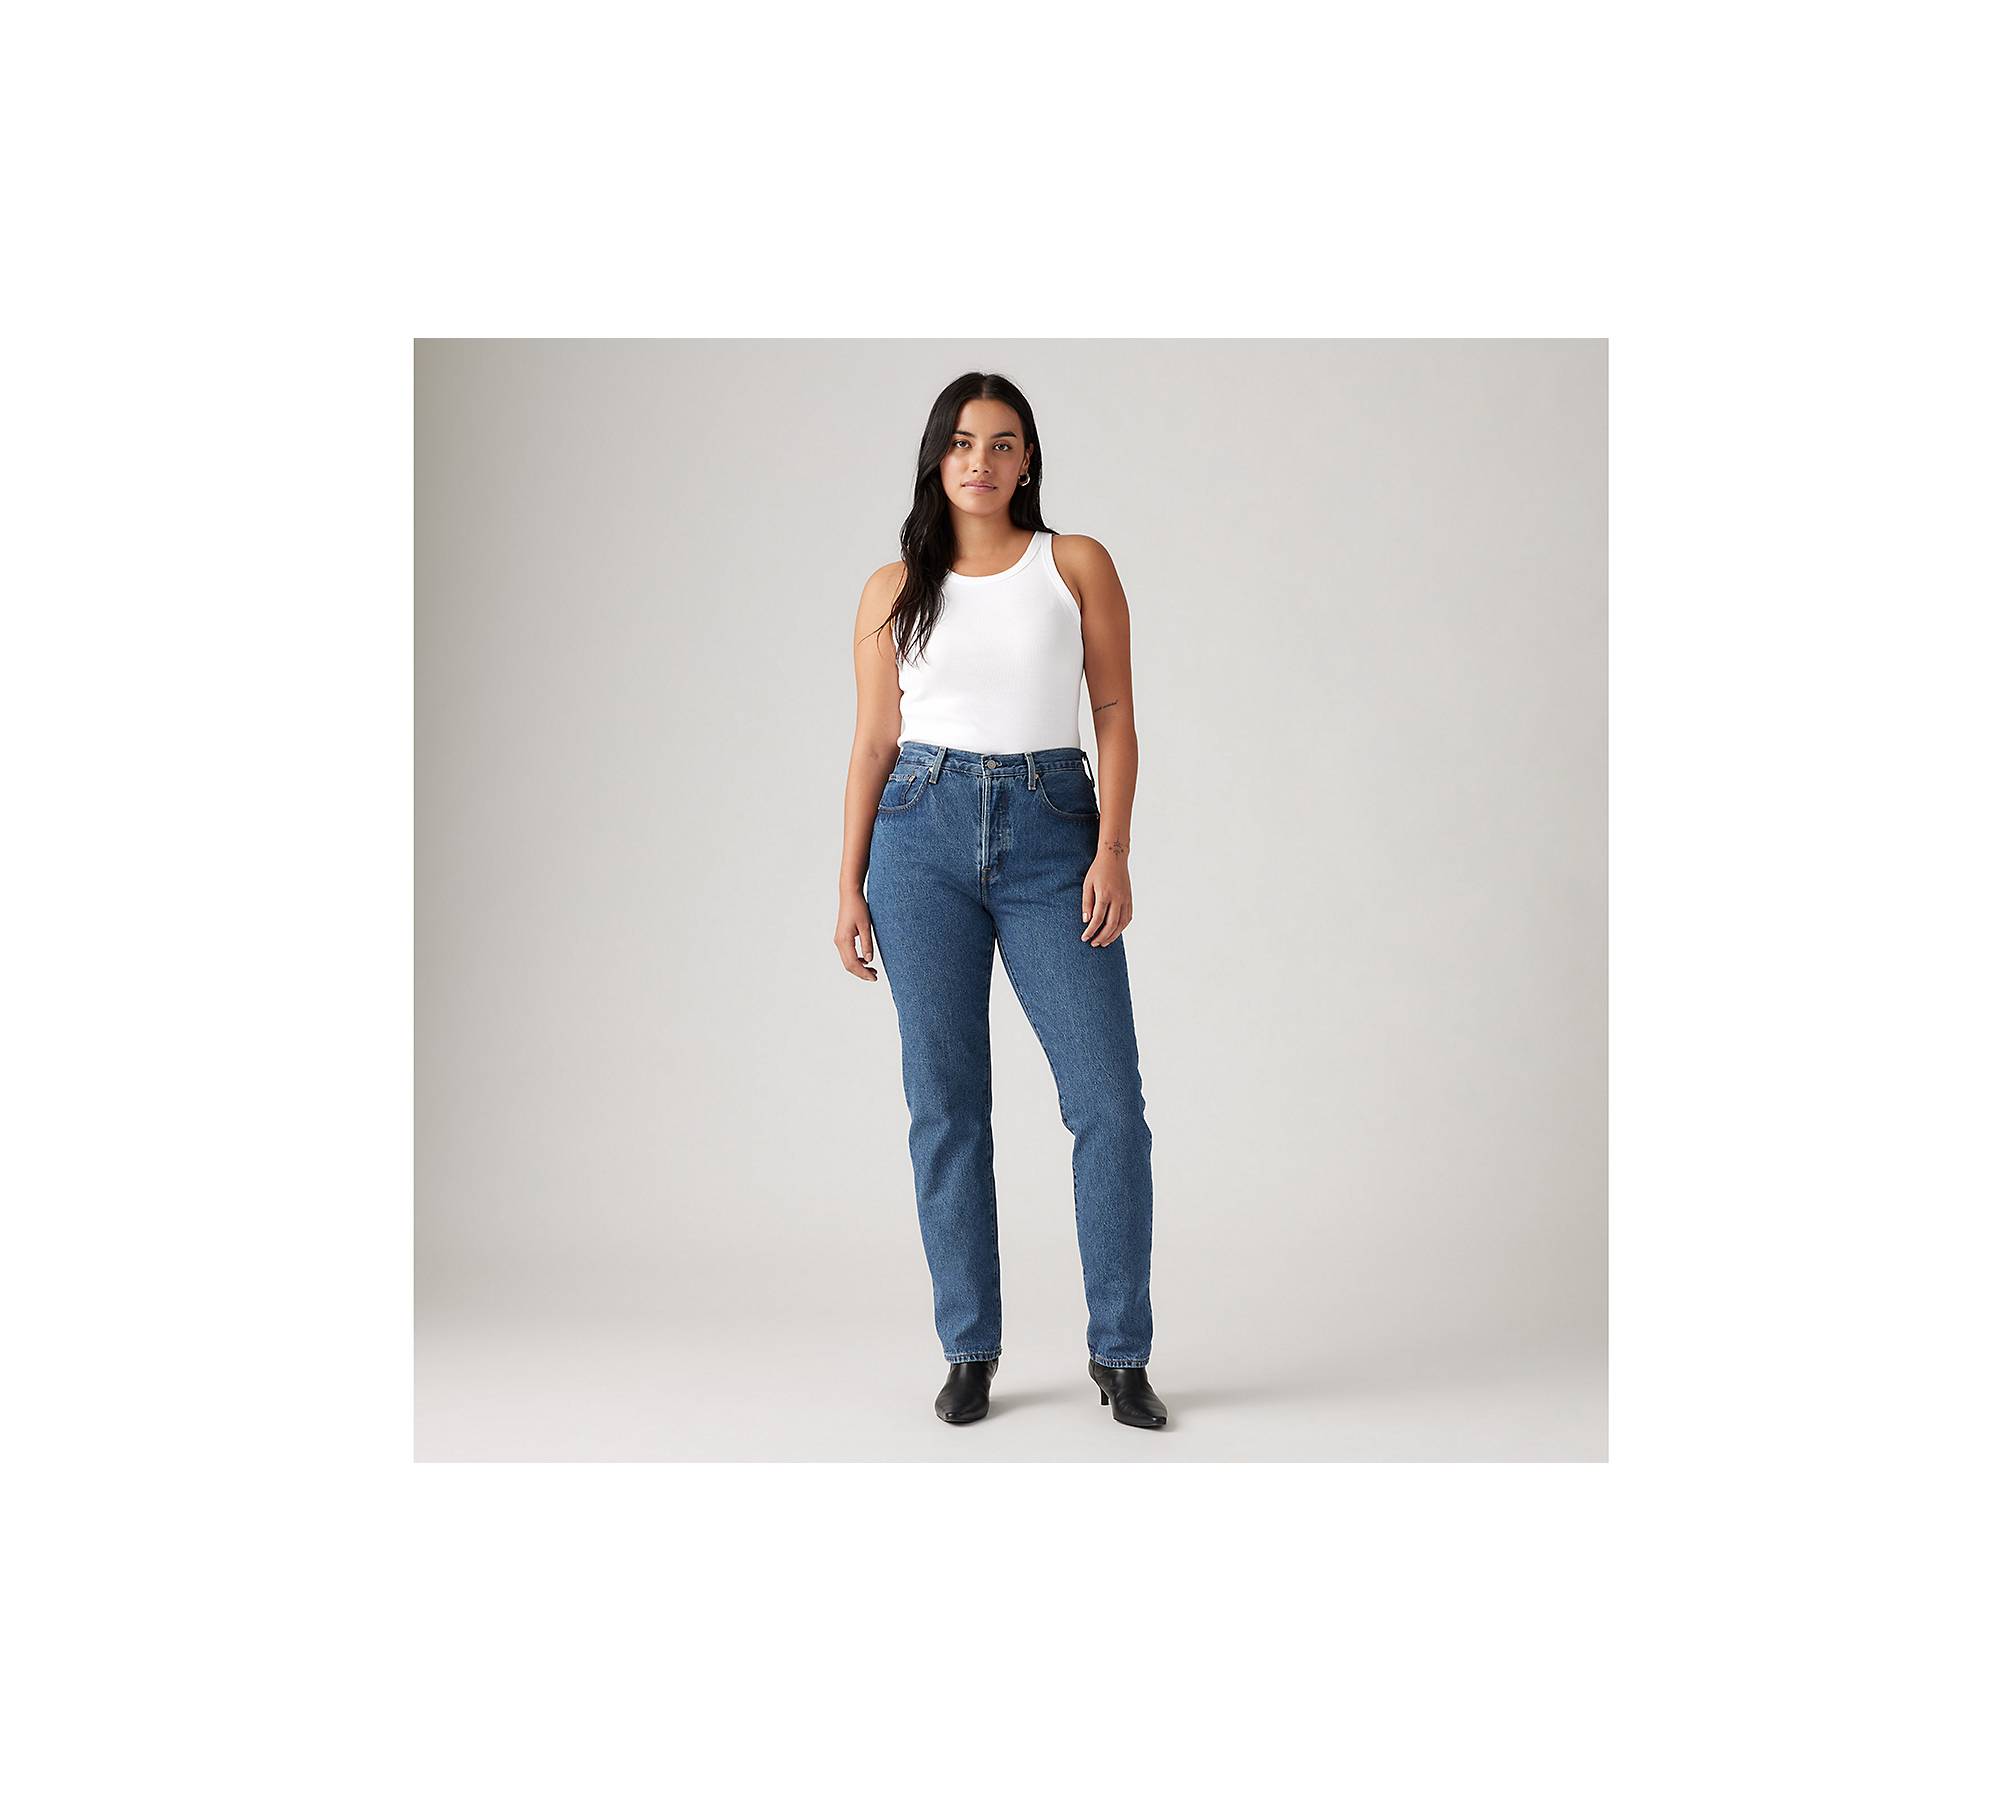  Women's Jeans High Waist Cut Out Straight Leg Jeans Women's  Jeans (Color : Medium Wash, Size : XX-Small) : Clothing, Shoes & Jewelry